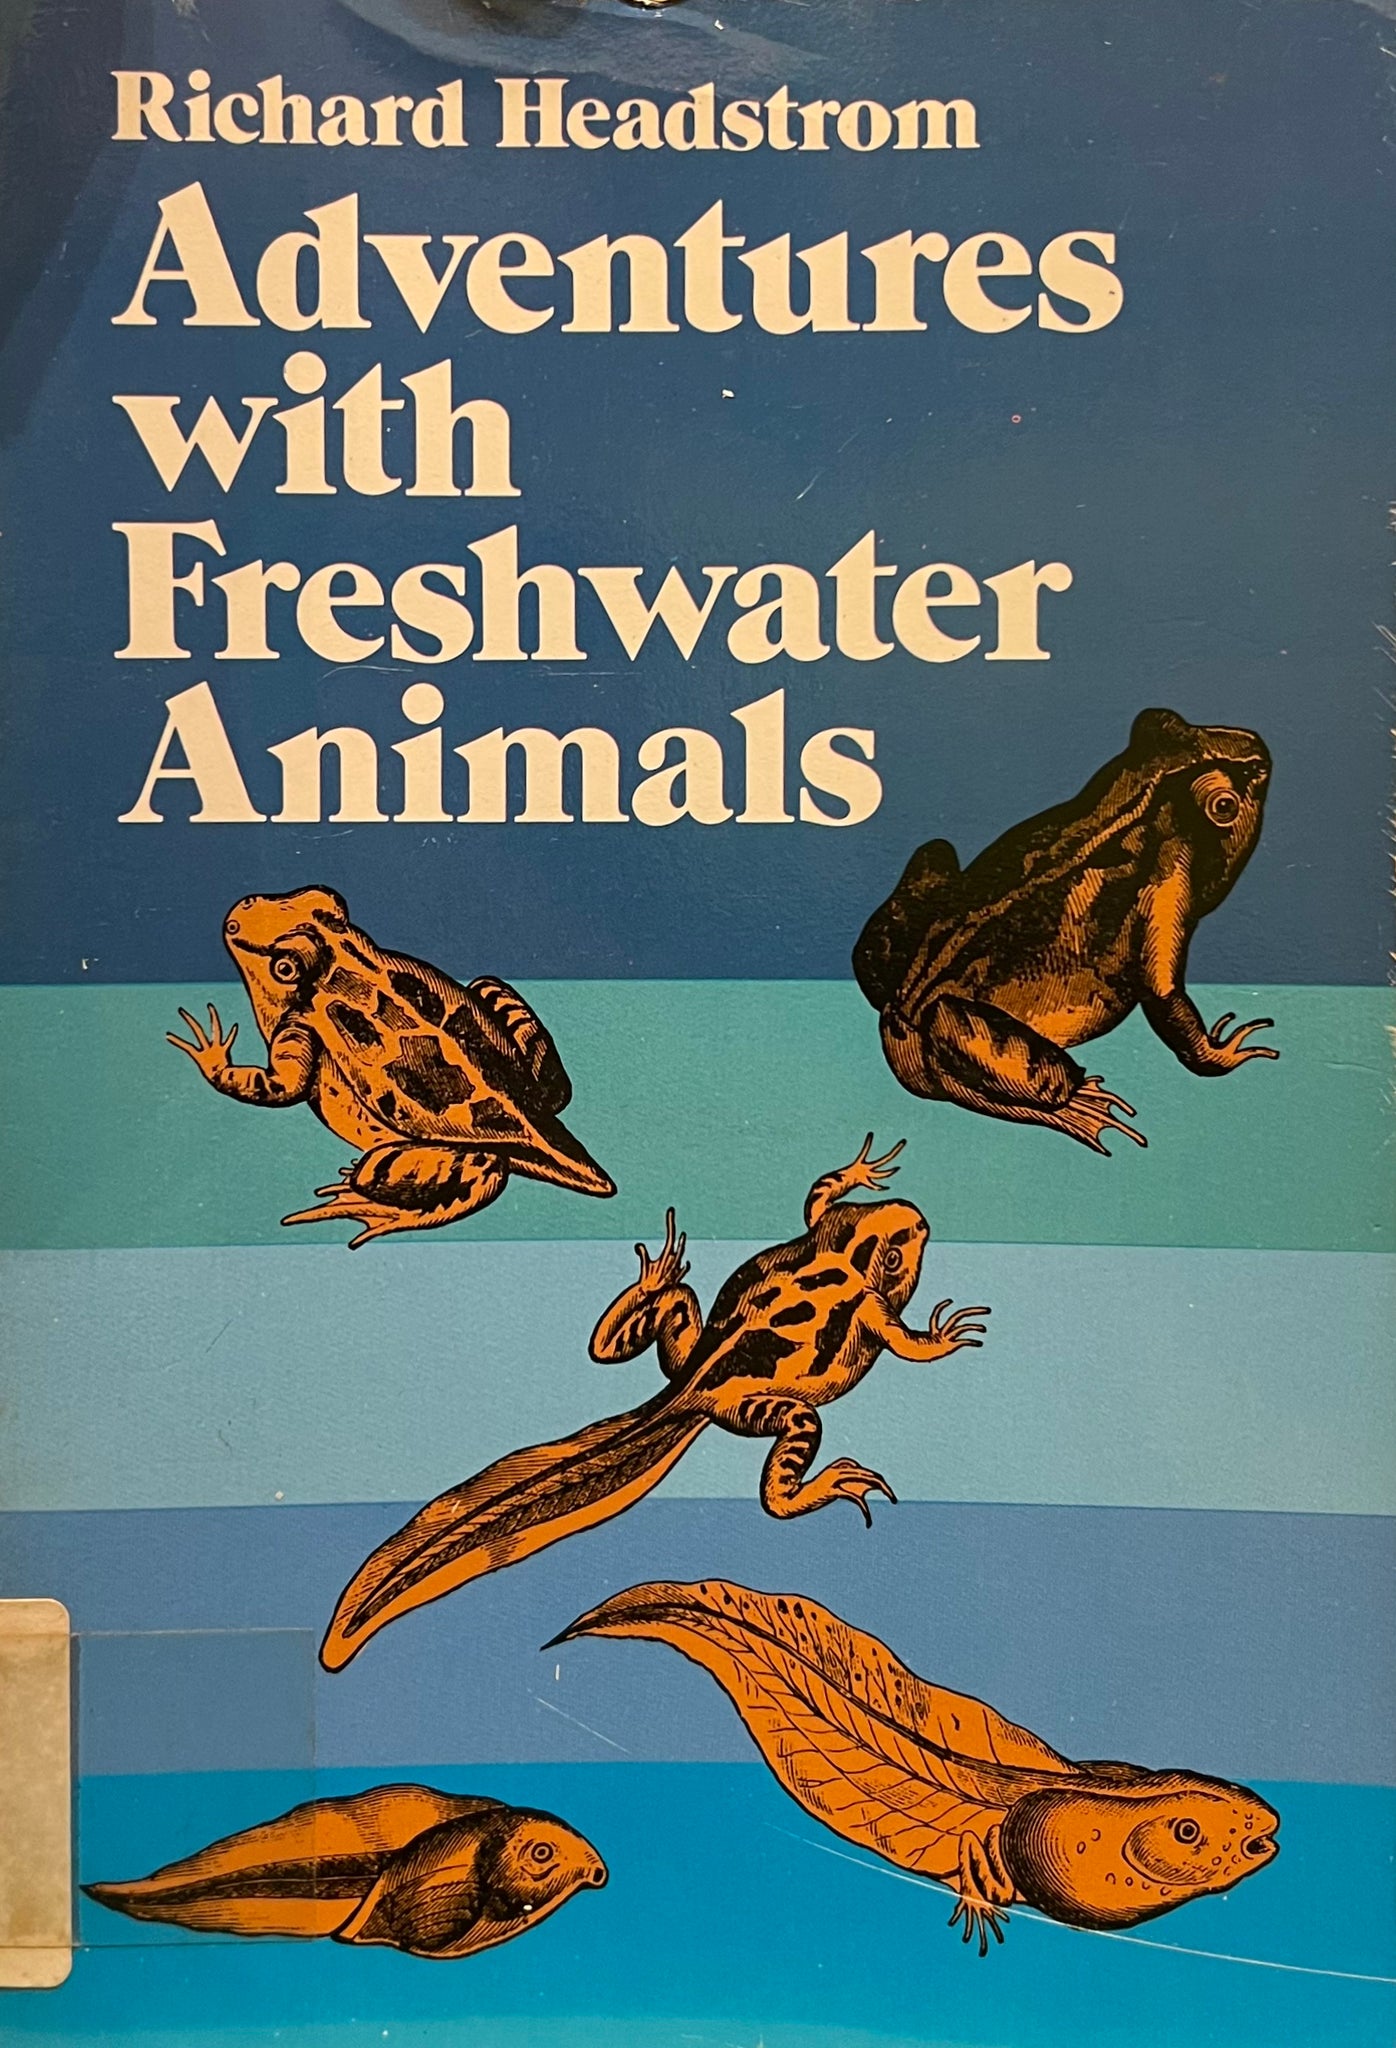 Adventures with Freshwater Animals, Richard Headstrom